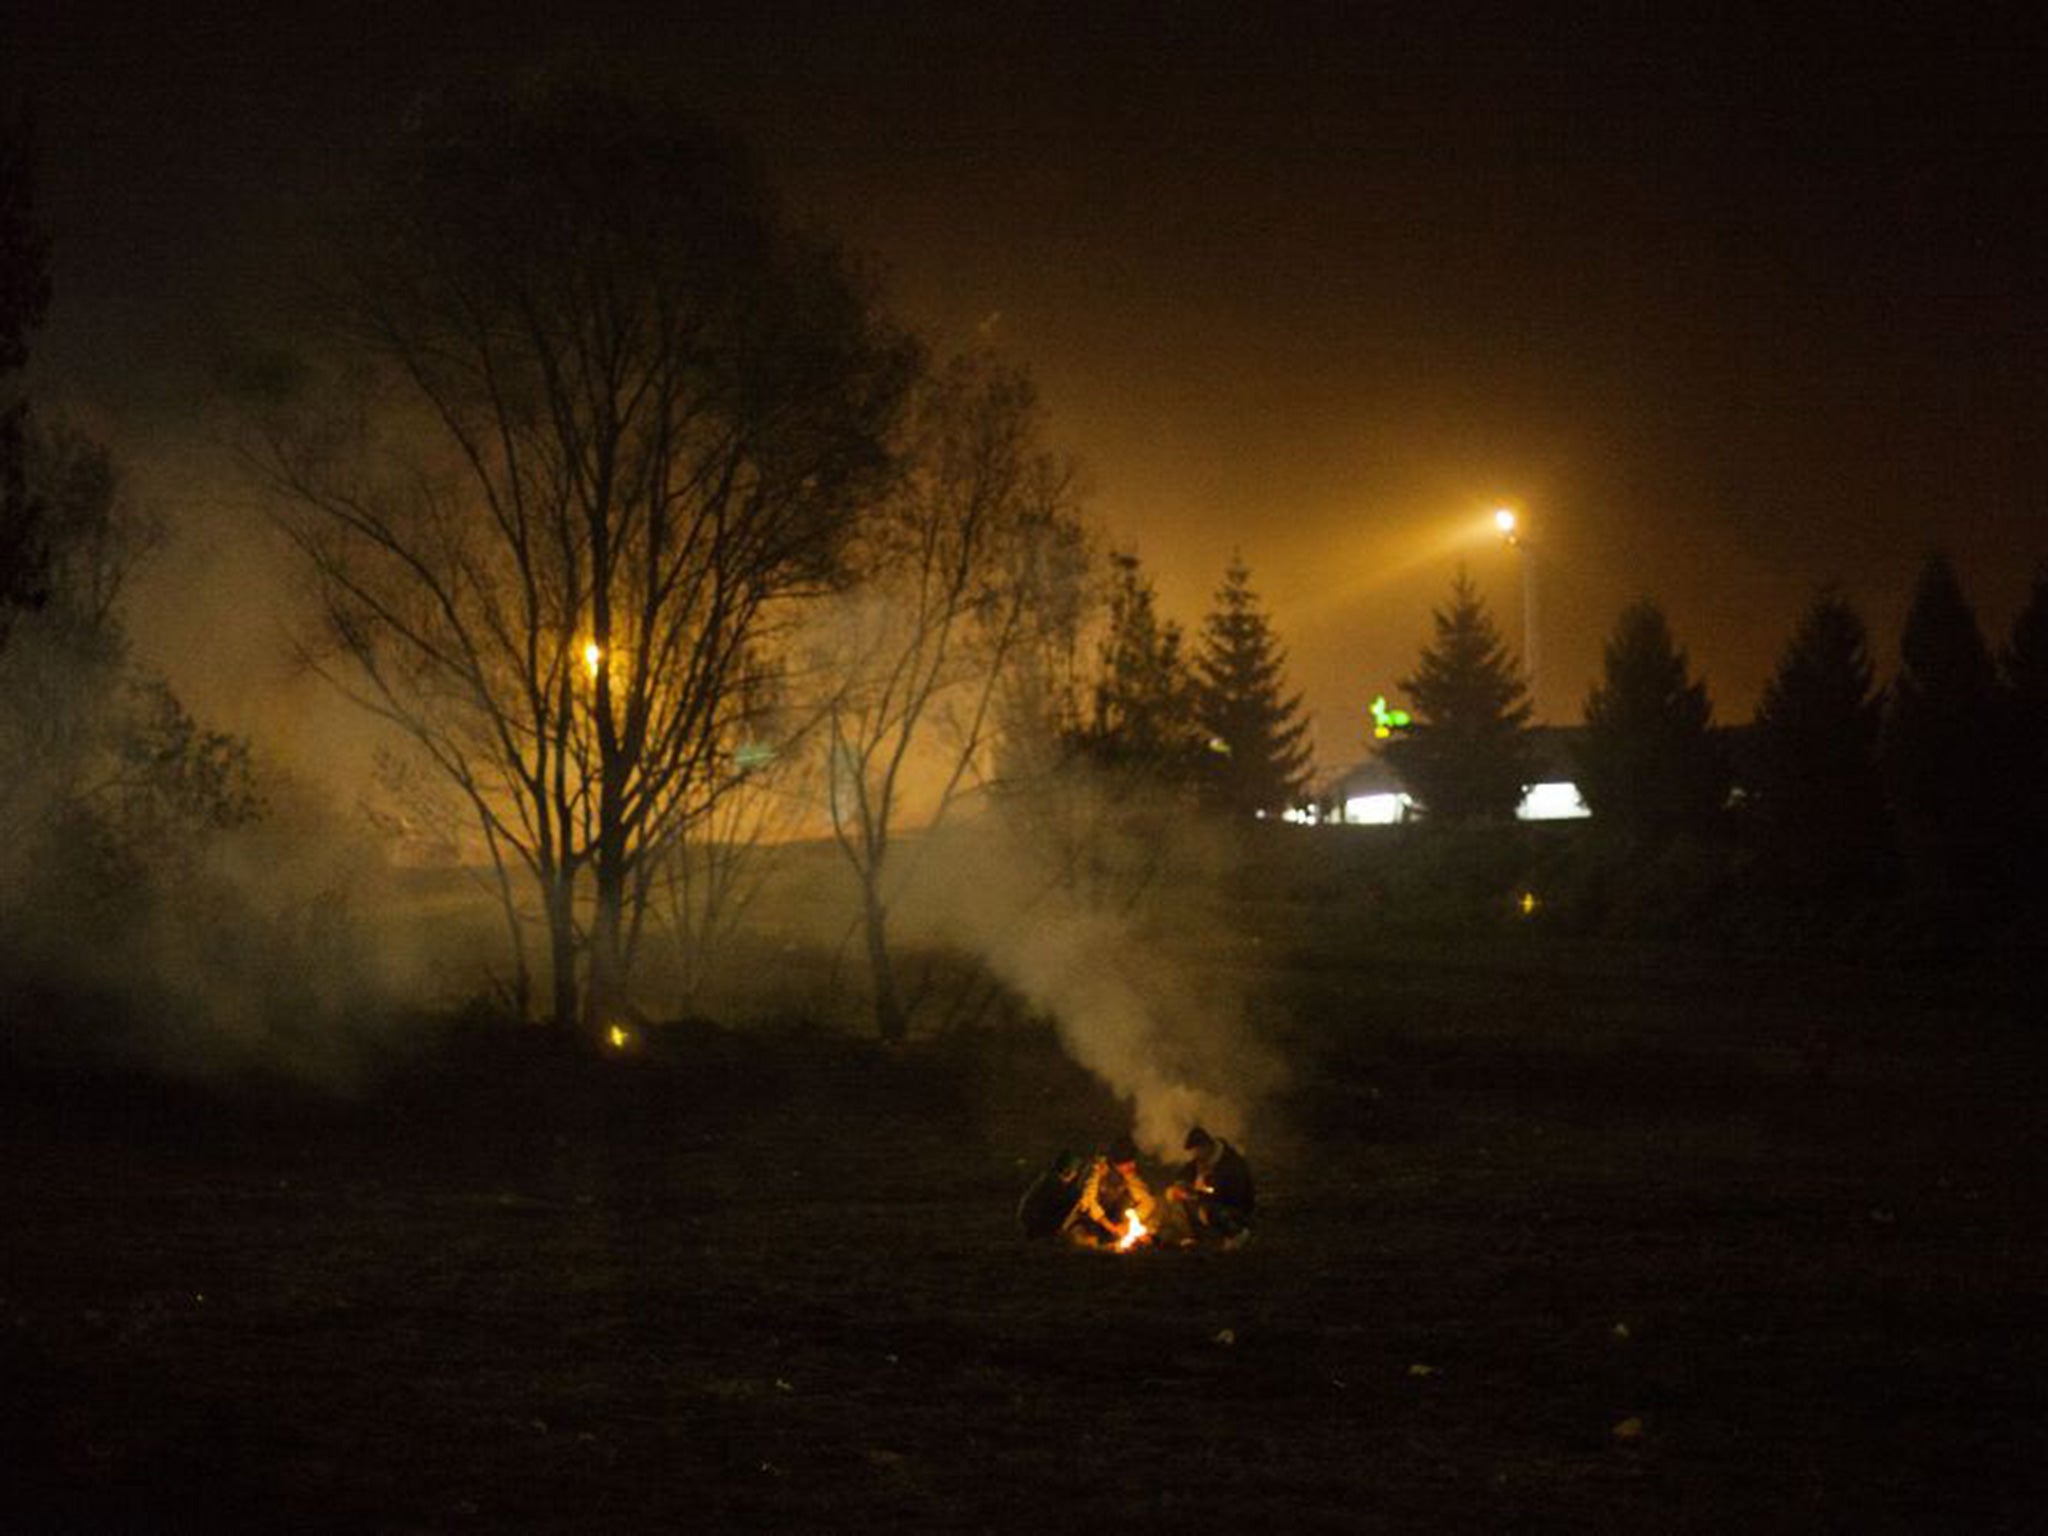 Syrian refugees make a fire while waiting to be allowed to go into Austria at the Slovenian-Austrian border